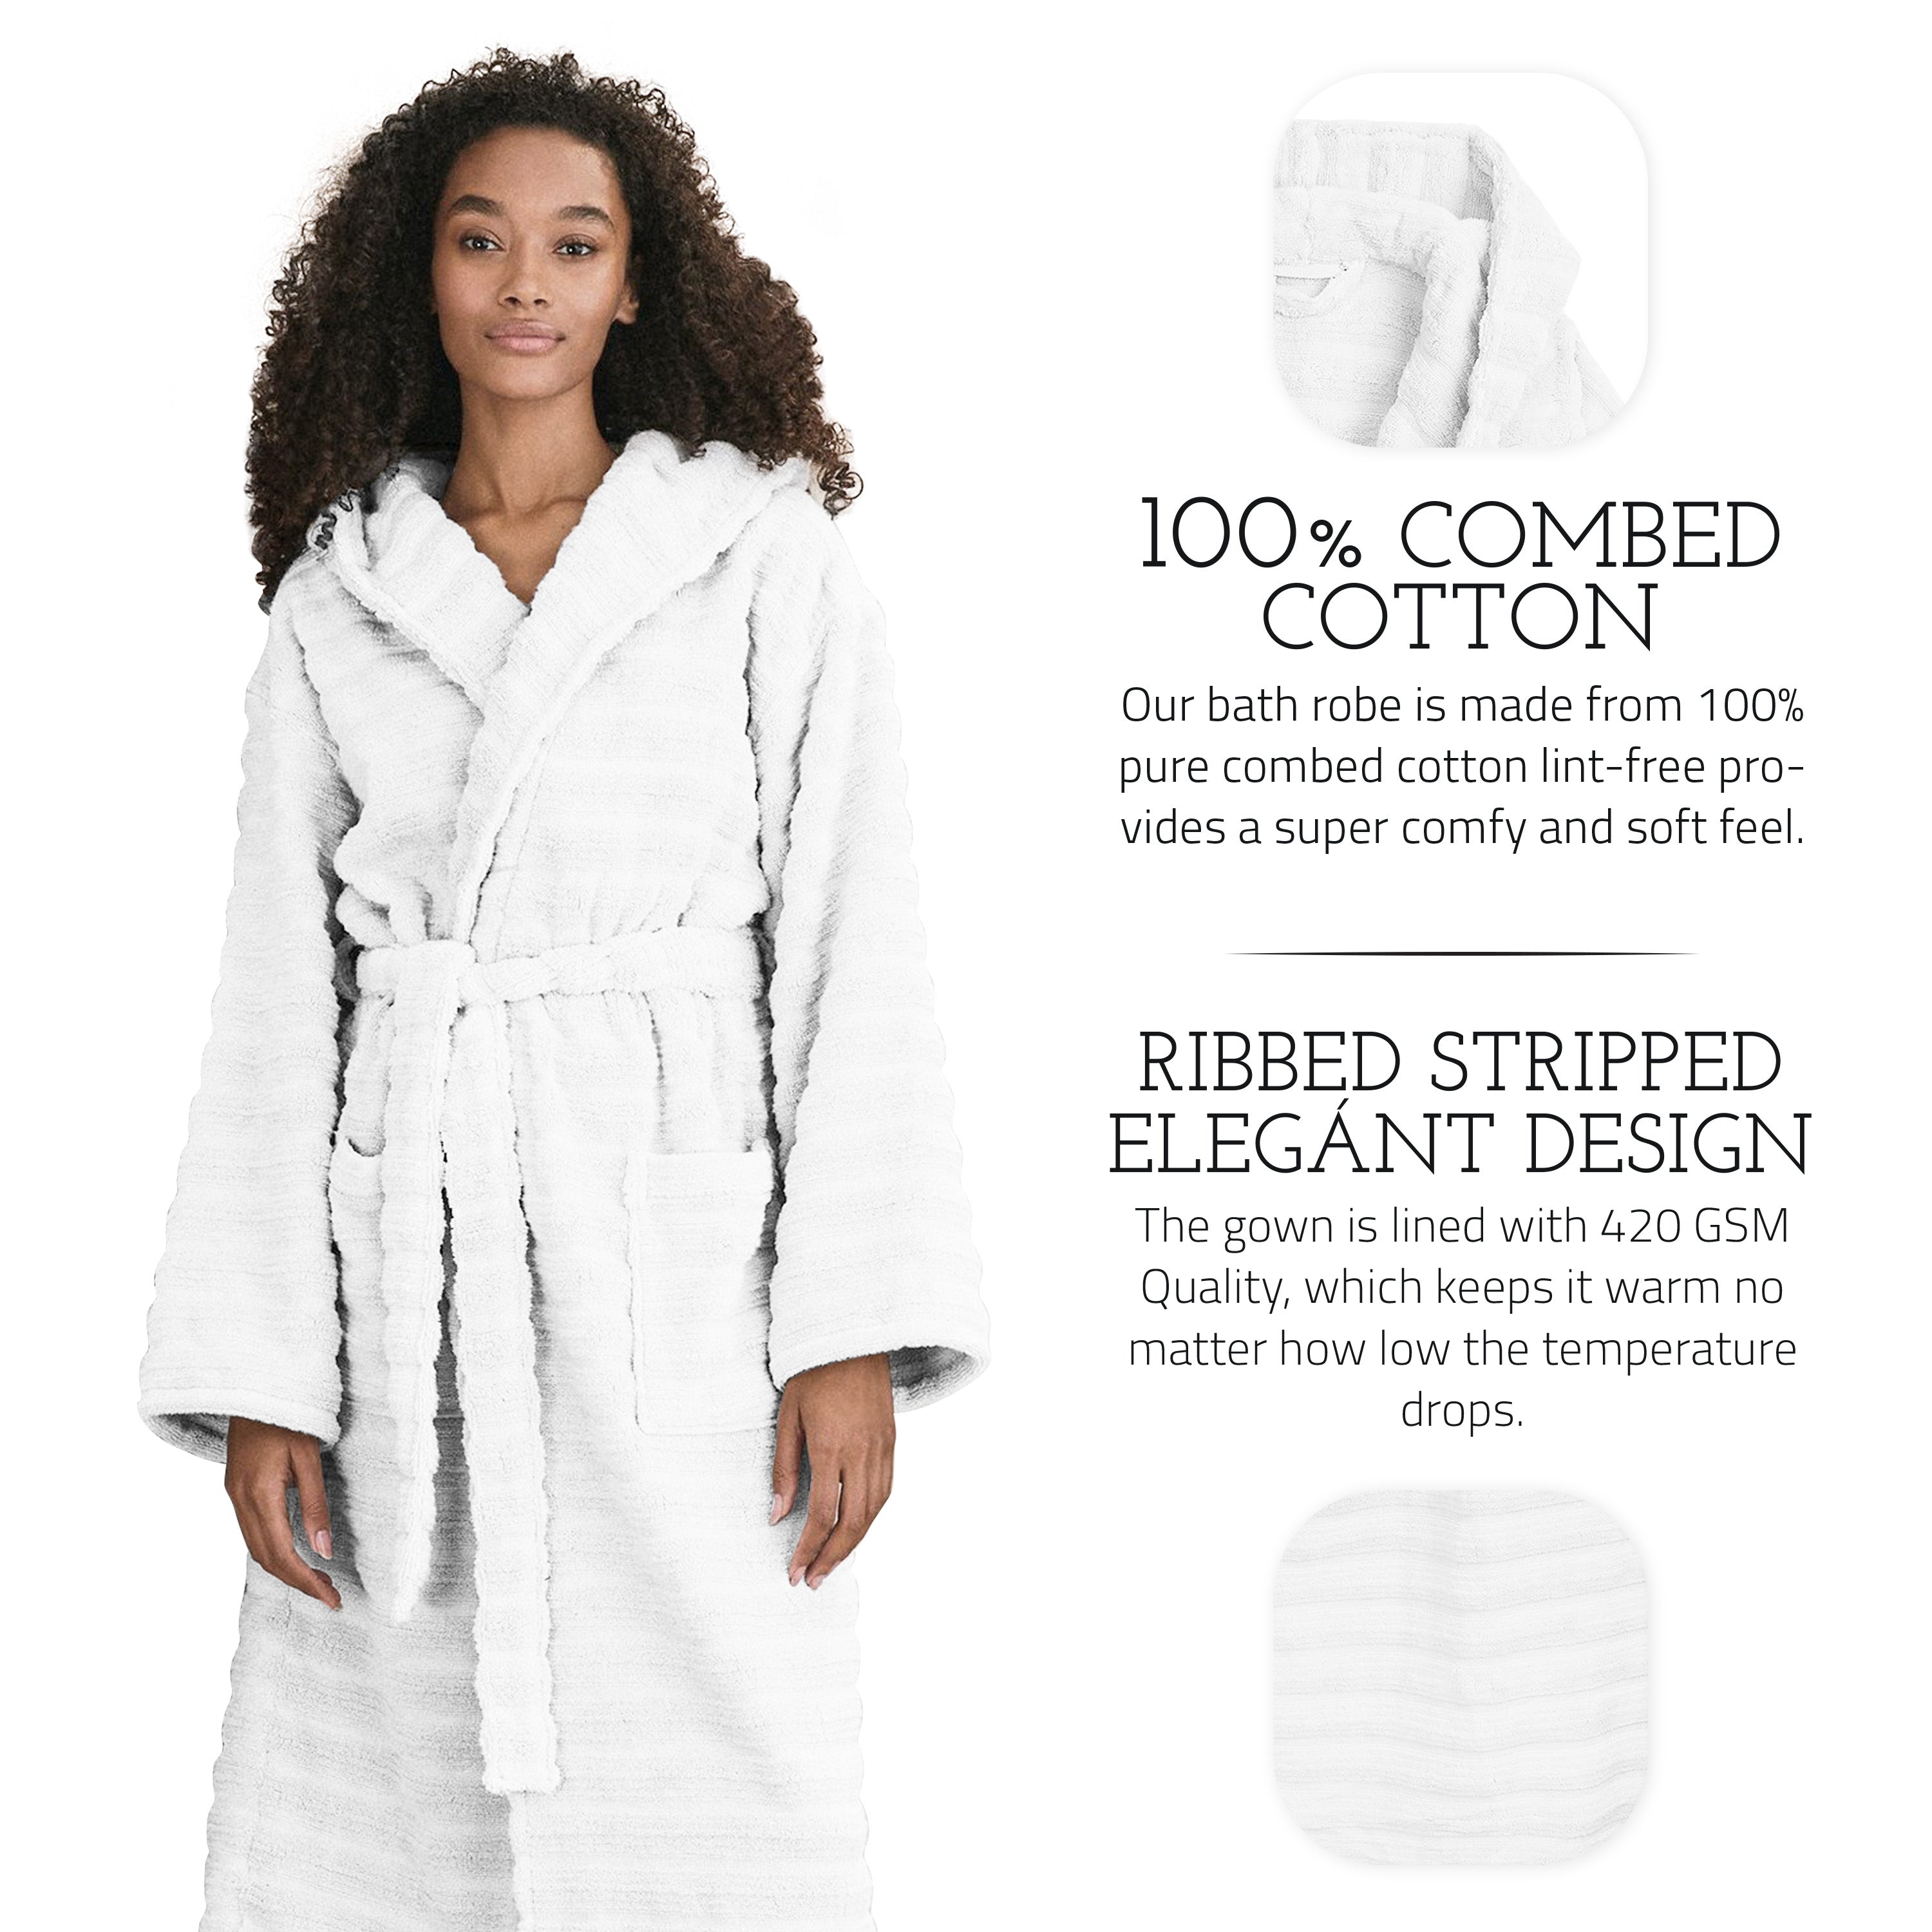 100% LUXURY EGYPTIAN COTTON TERRY TOWEL BATH ROBE UNISEX TOWELLING DRESSING  GOWN | eBay